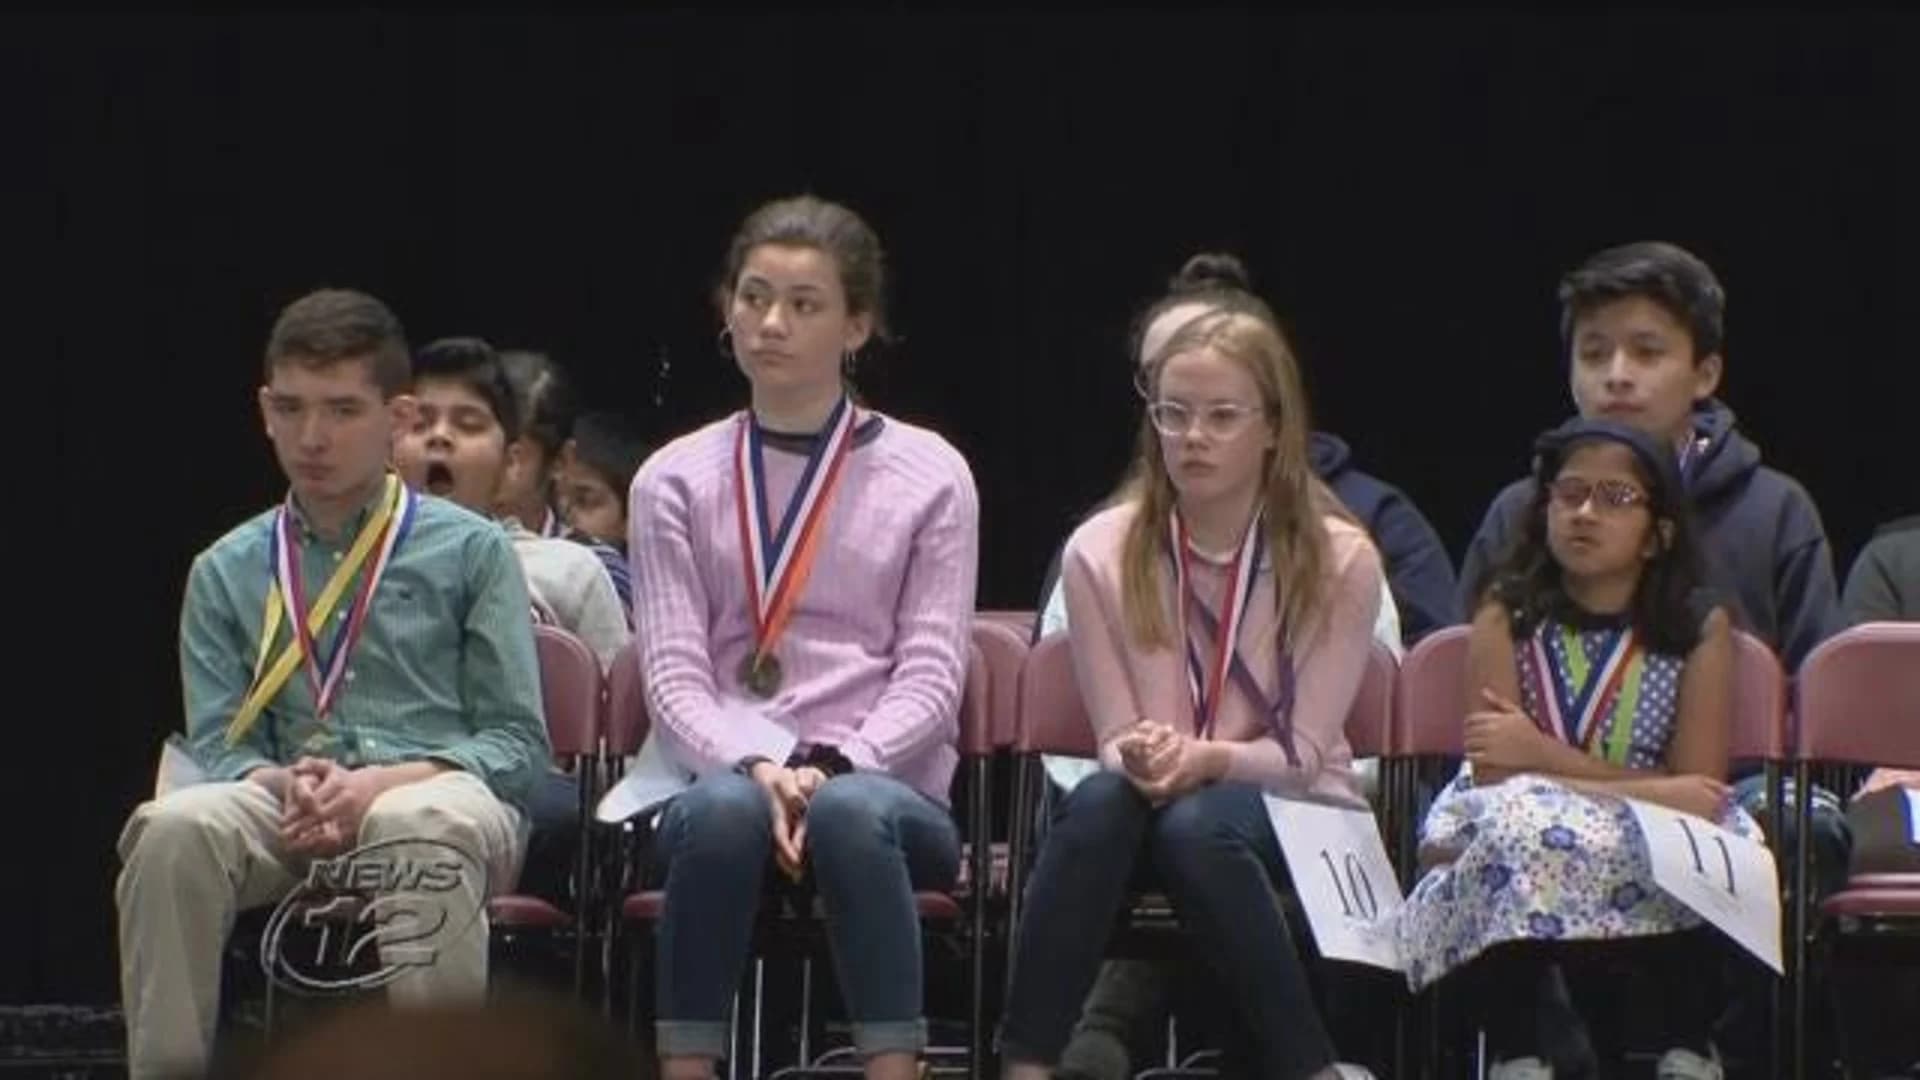 Jersey City student wins Hudson County Spelling Bee